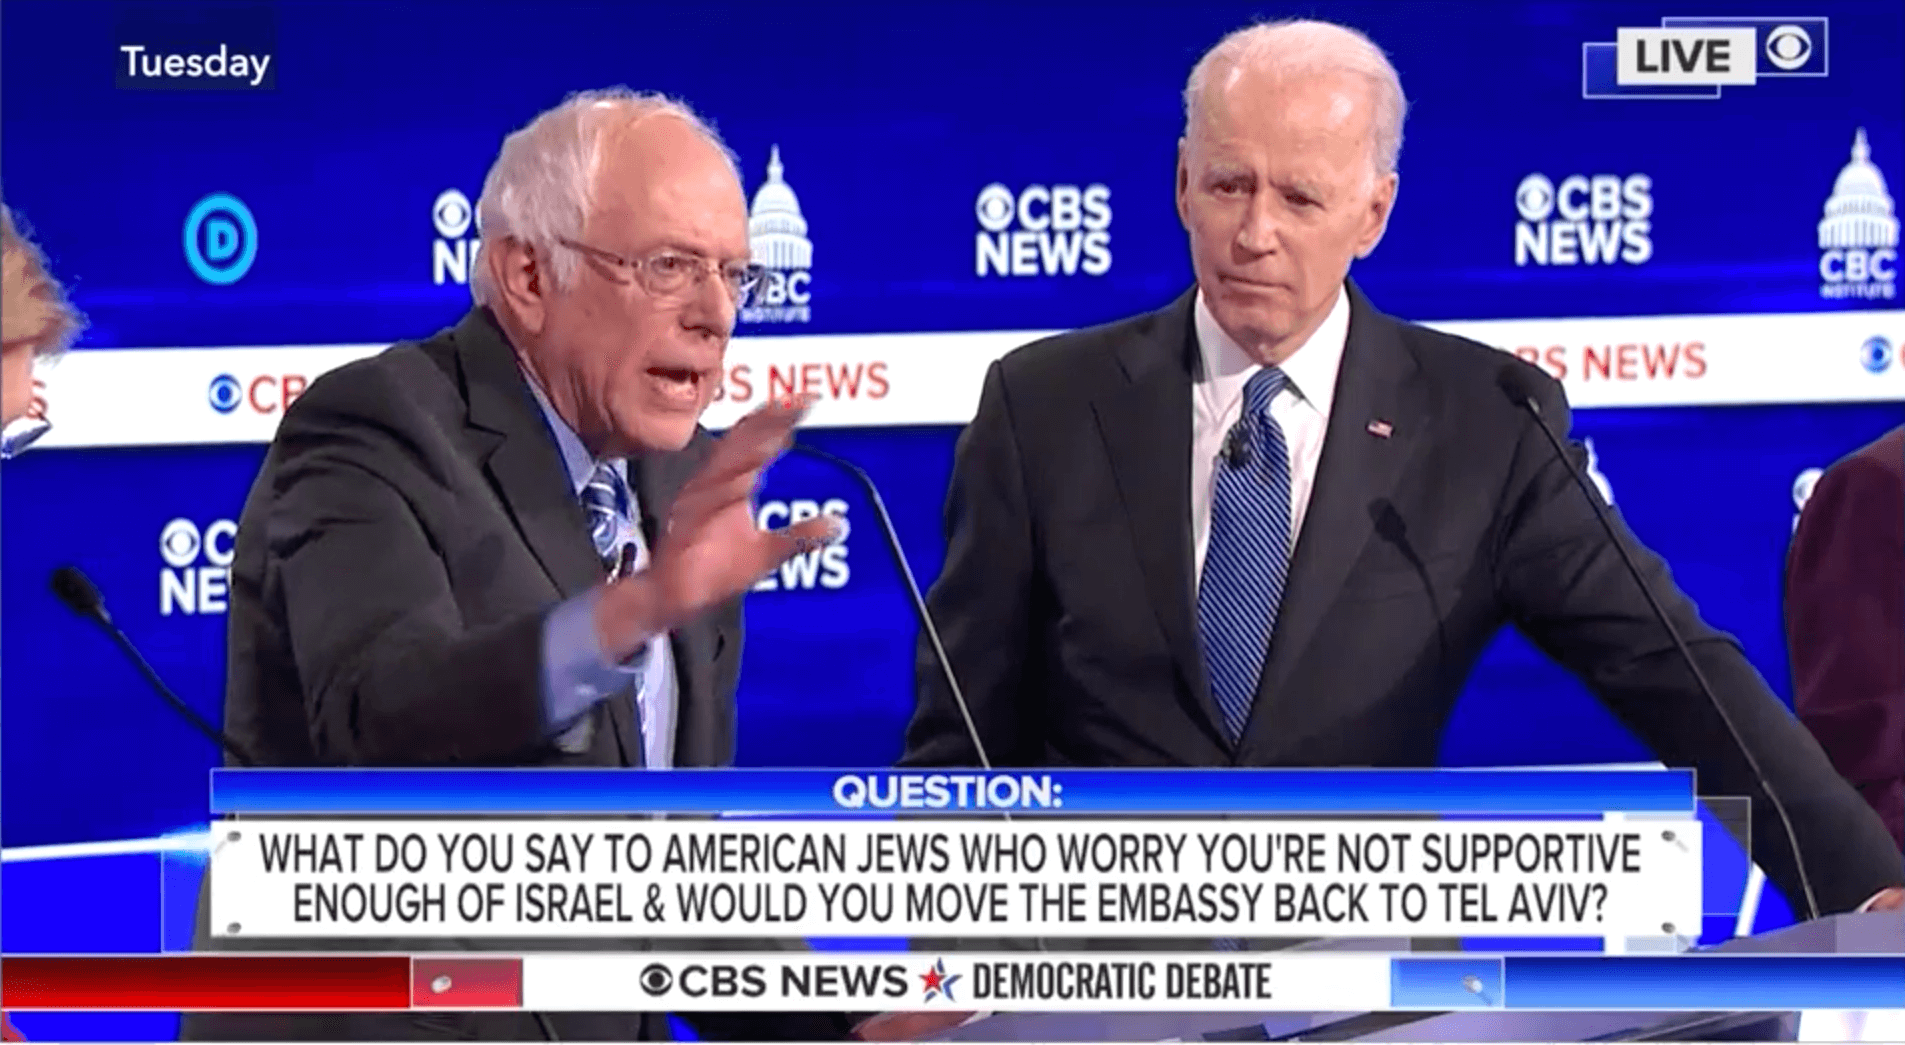 Screenshot of Bernie Sanders answering a question on Israel during a February 25, 2020 debate in South Carolina.